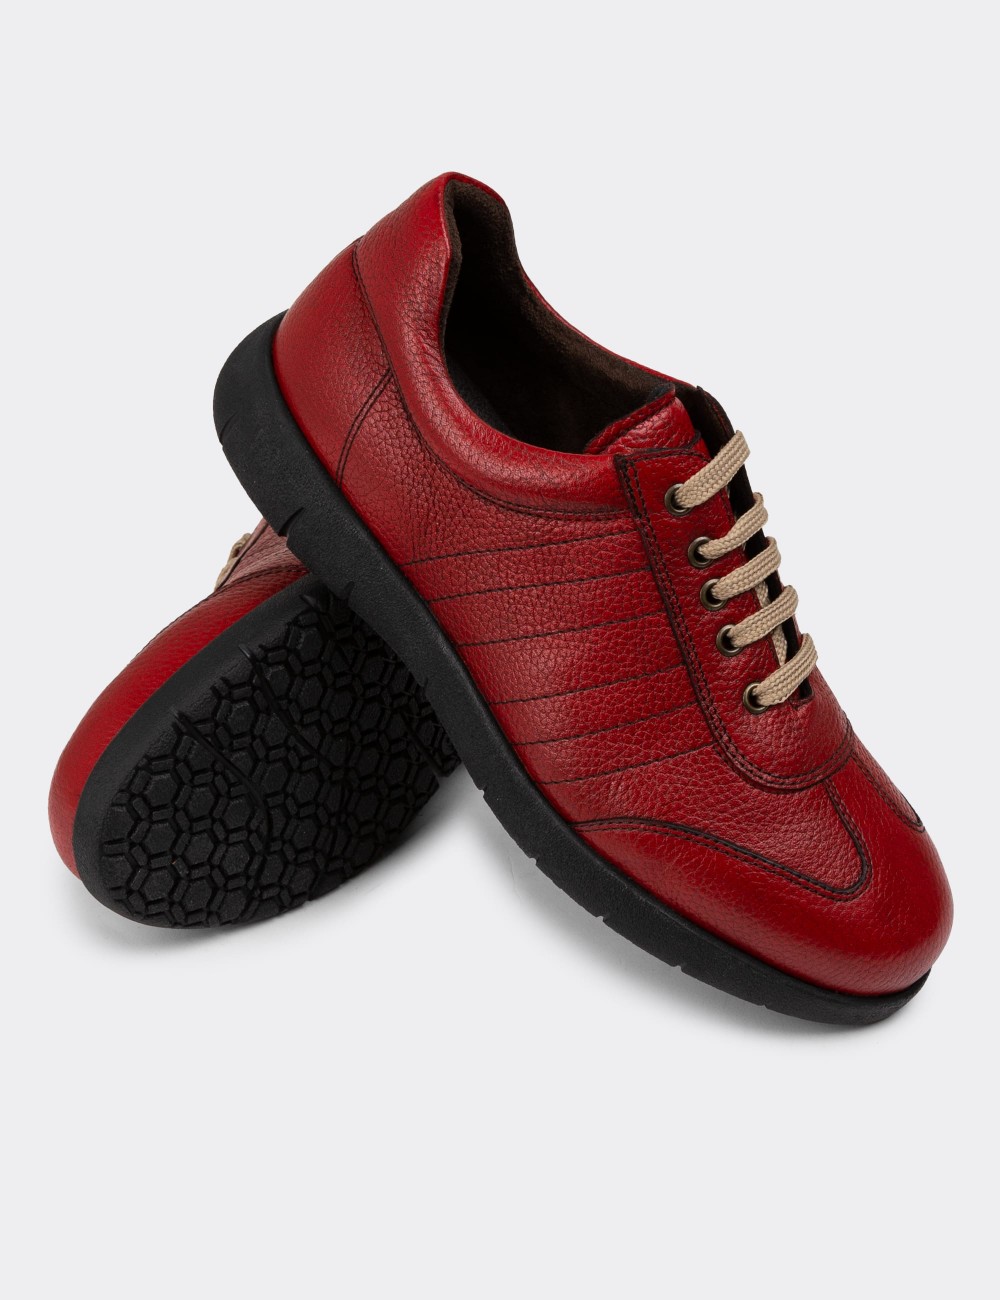 Red Leather Lace-up Shoes - 01950MKRMC01